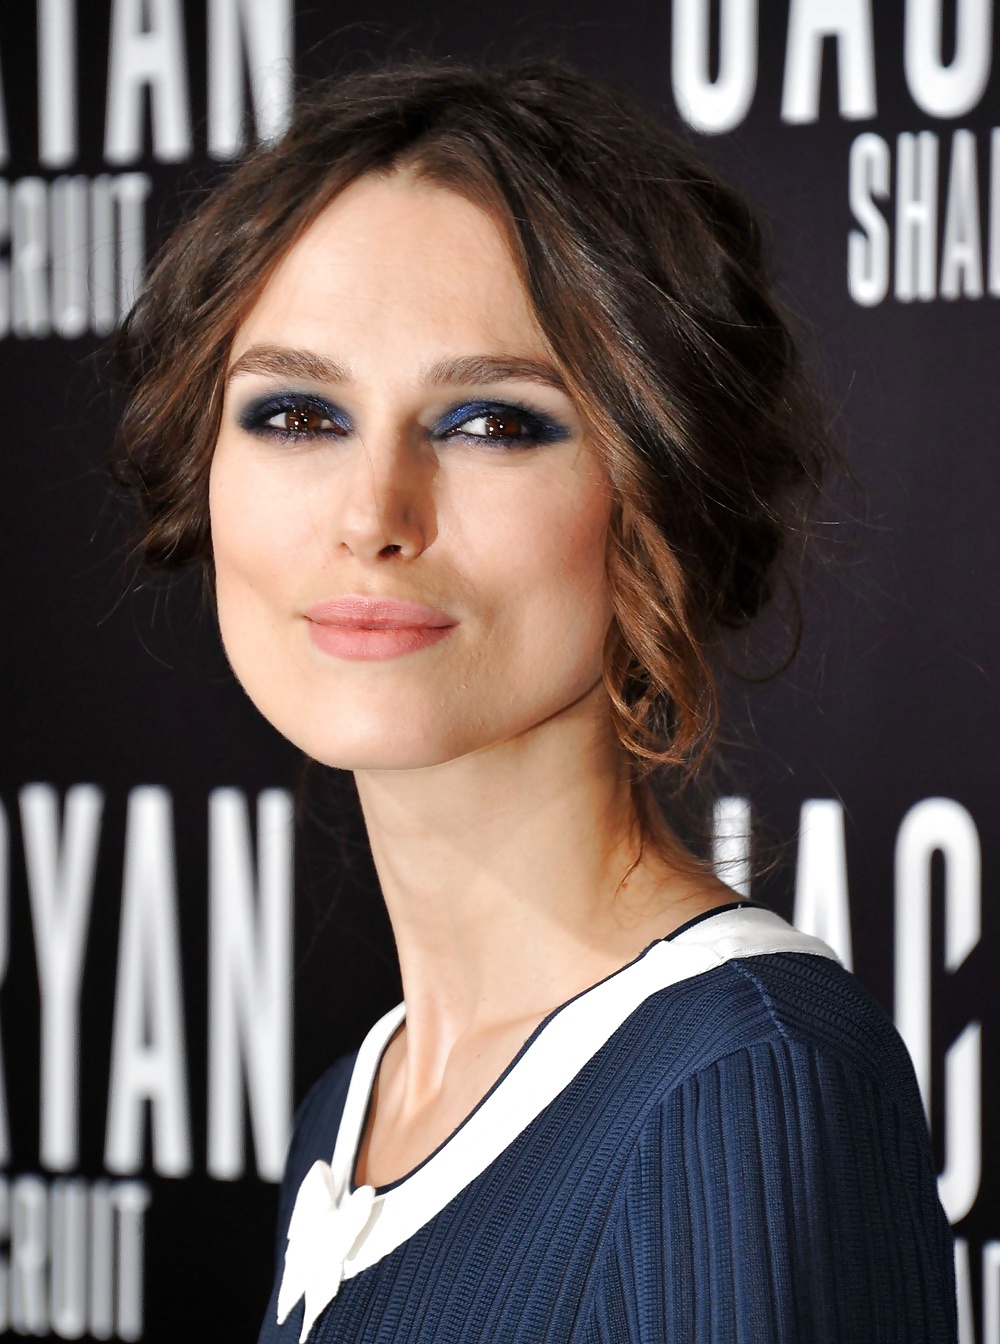 Keira Knightley The Royal Lady of England #35649586